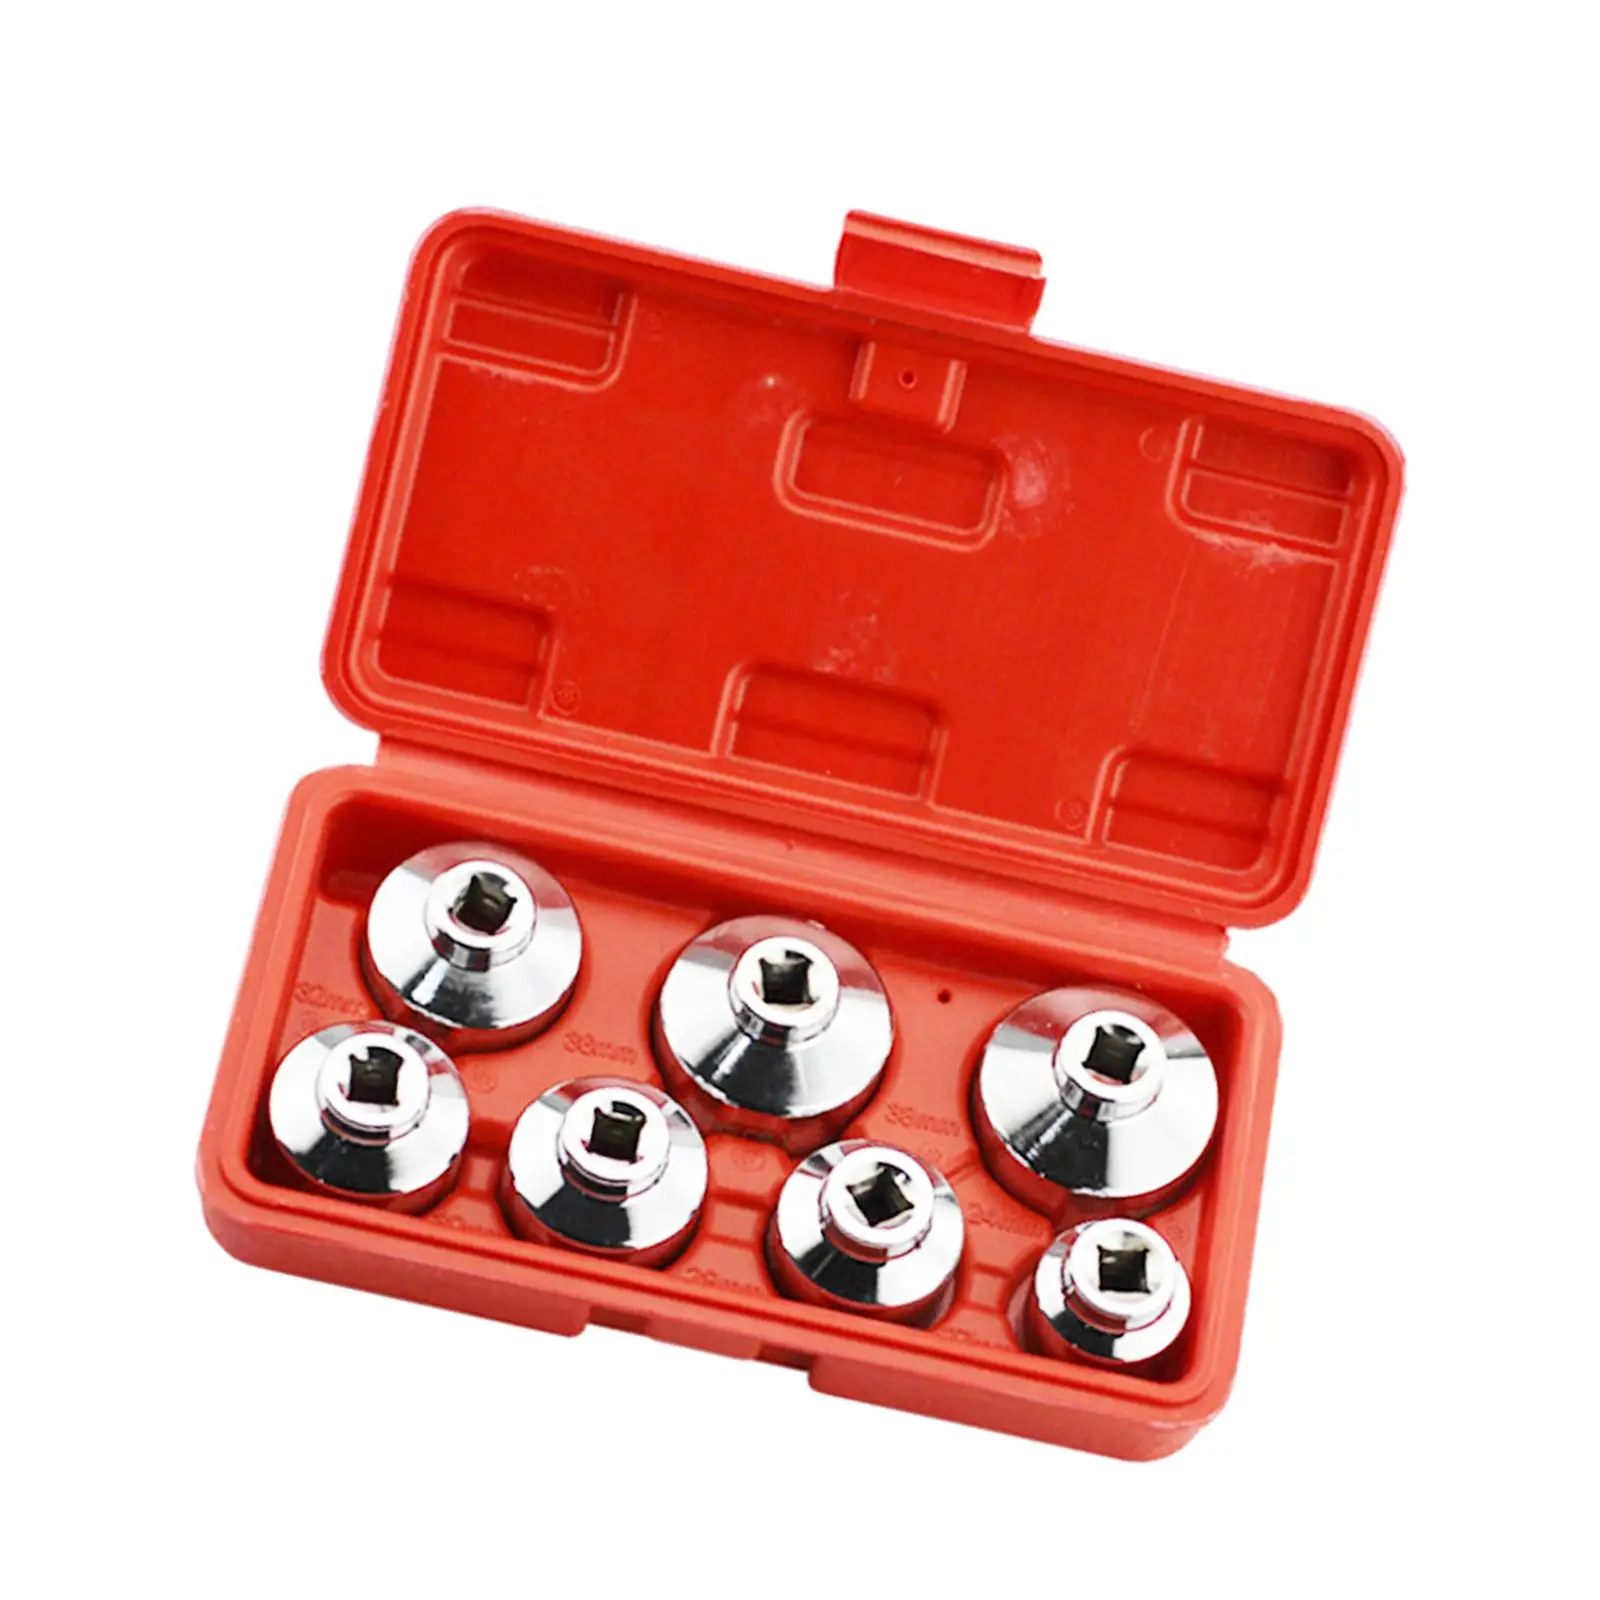 7Pcs Oil Filter Wrench Socket Set 3/8-inch Drive Car Accessories Disassembly Tool Sturdy Fuel Filter Cap Removal Tool Set